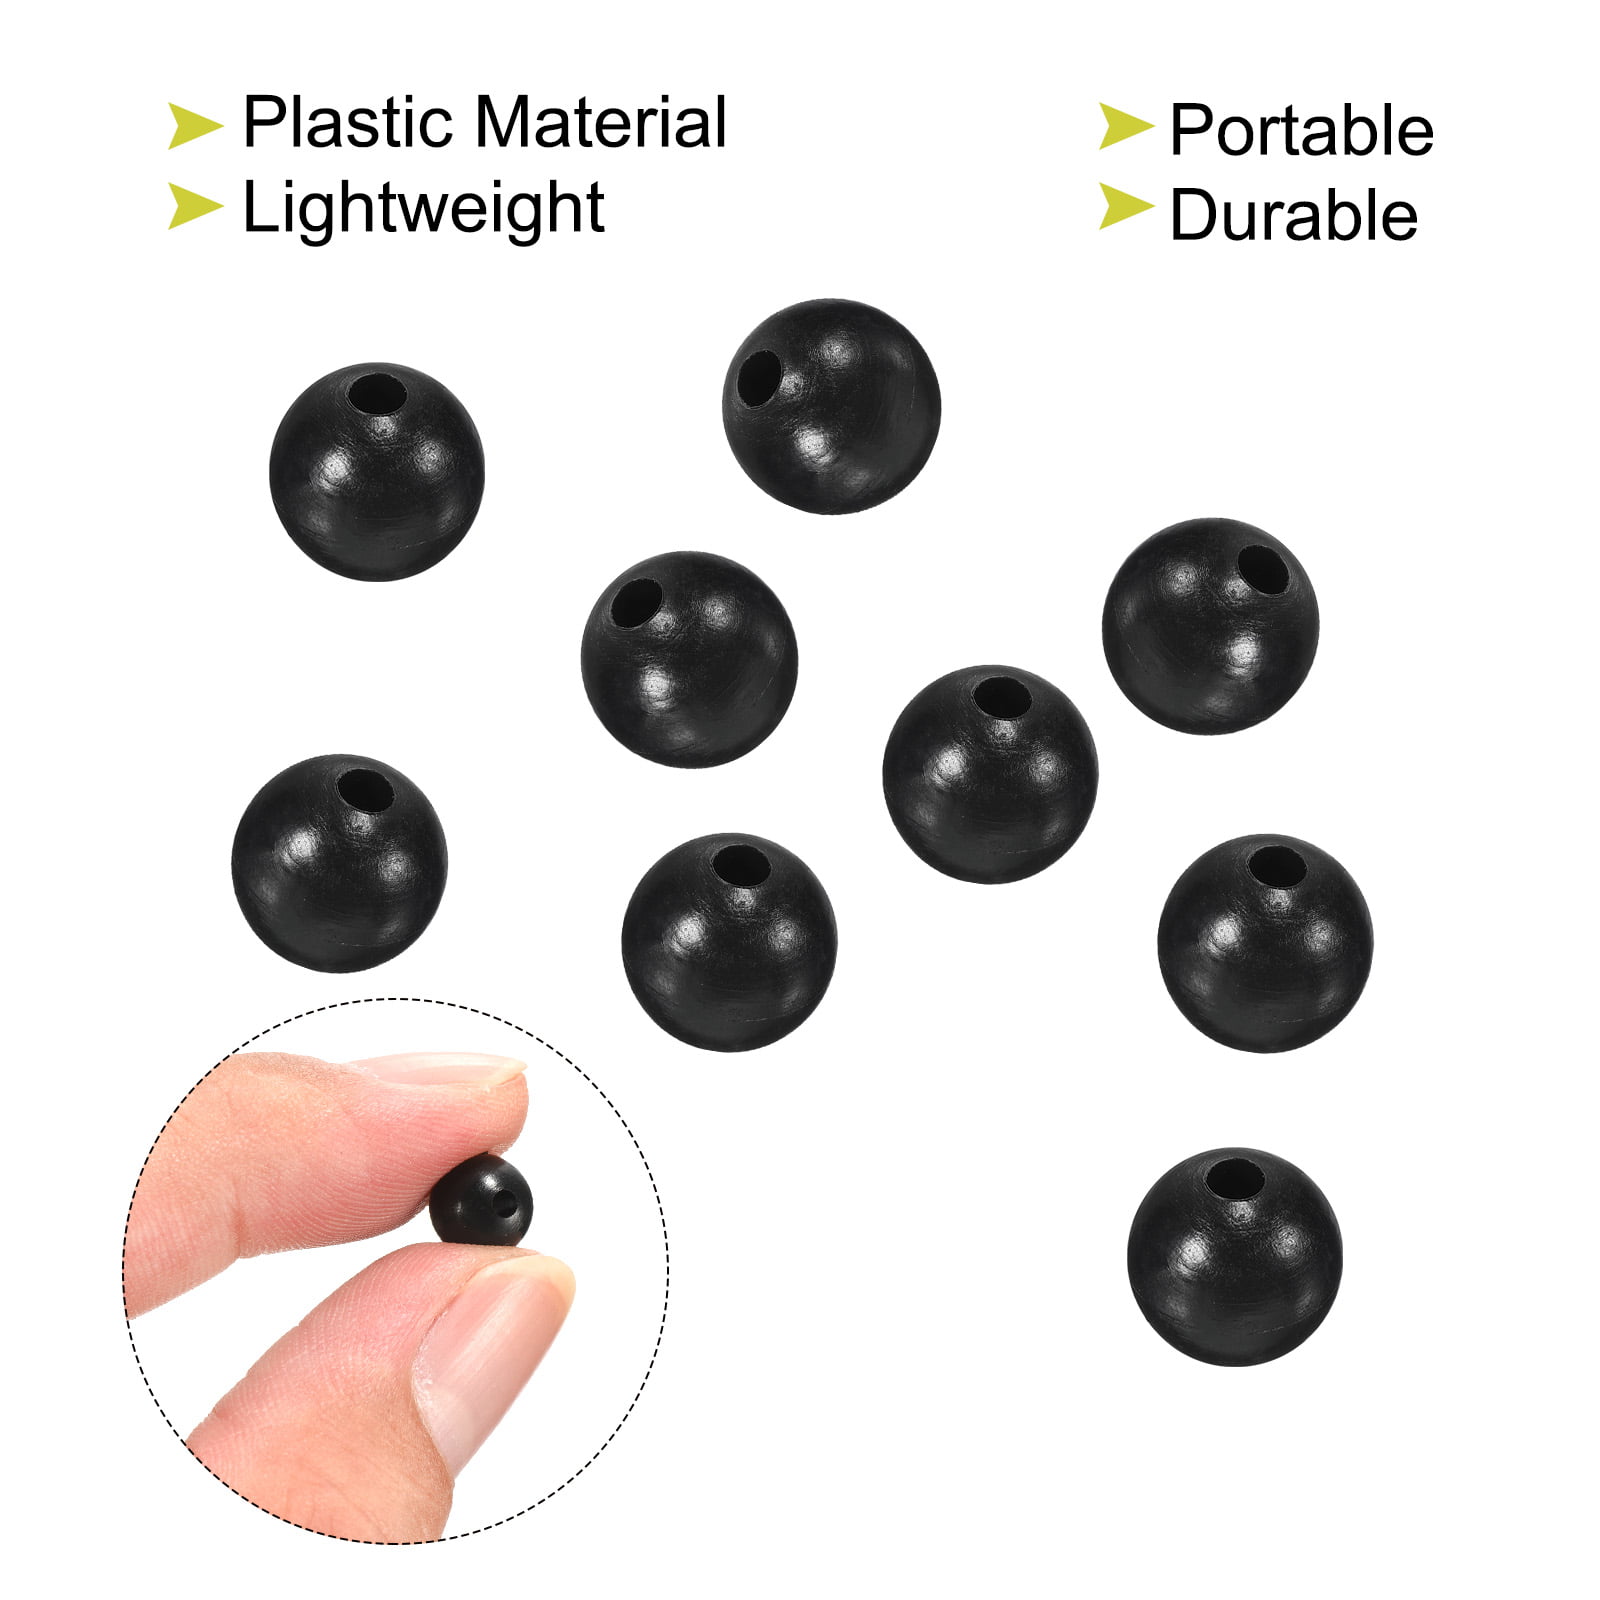 Uxcell 7mm Round Plastic Fishing Beads Tackle Tool Black 200